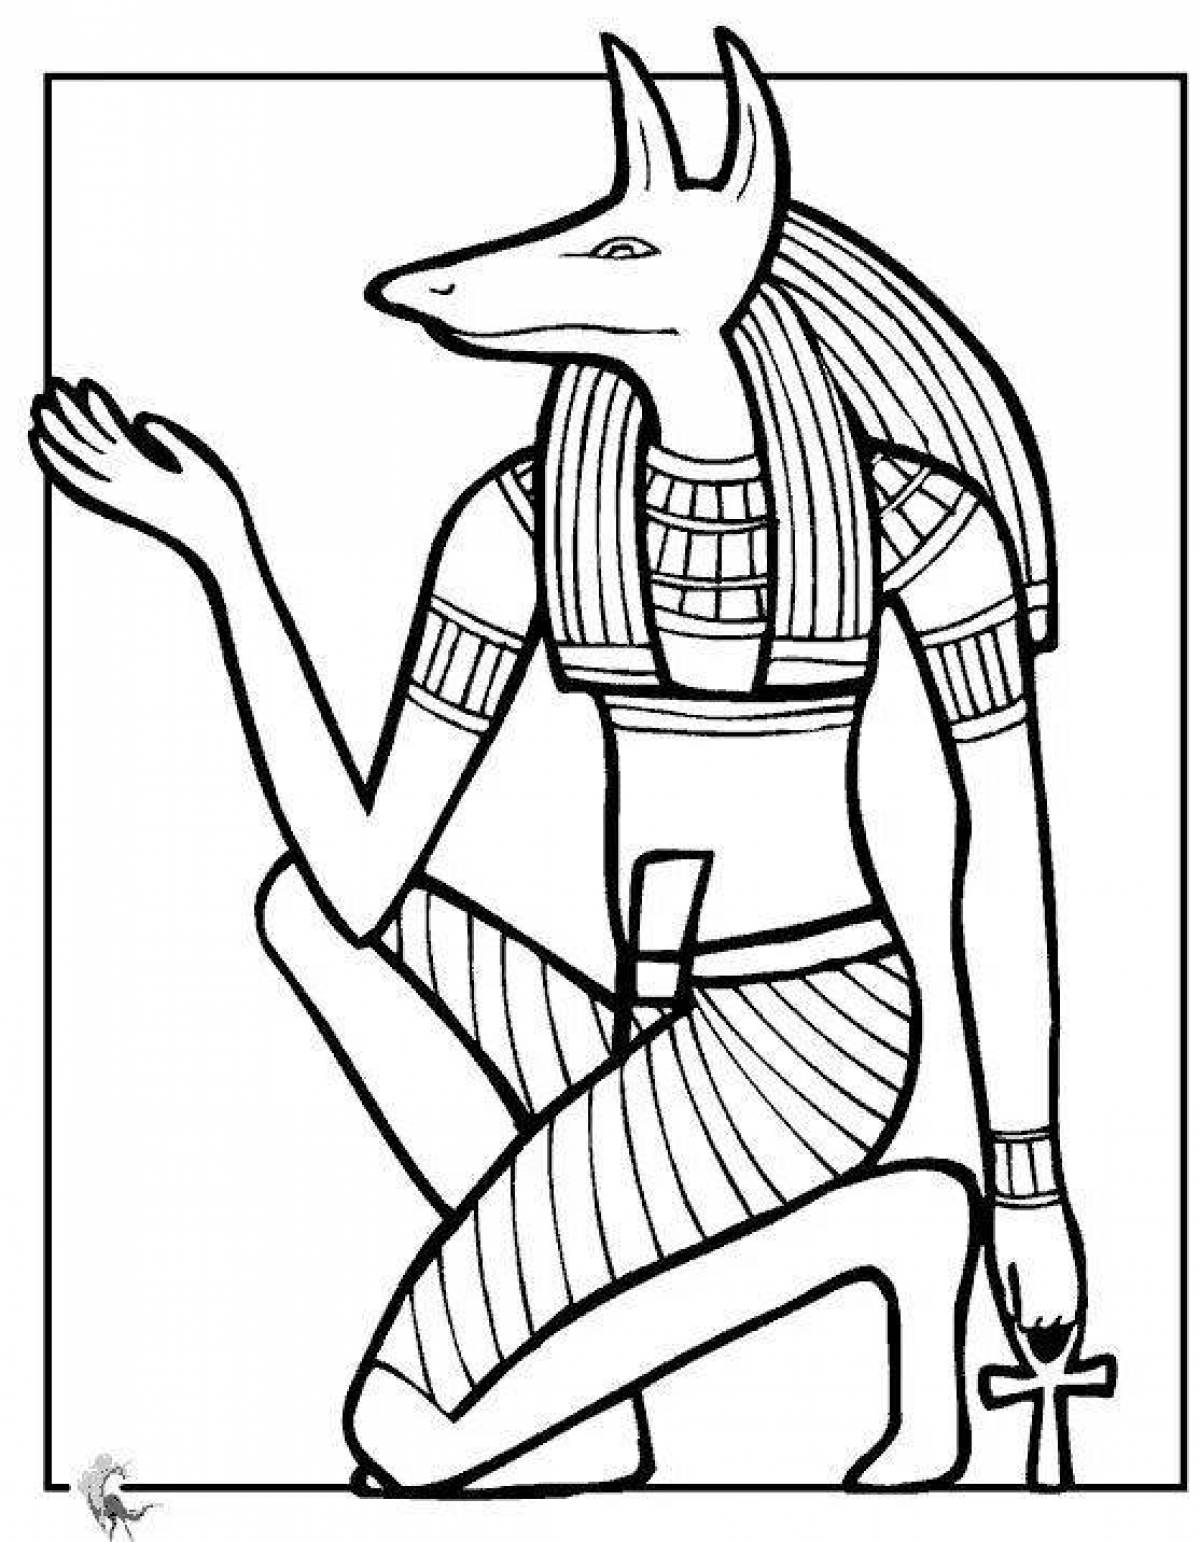 Flawless Anubis coloring page